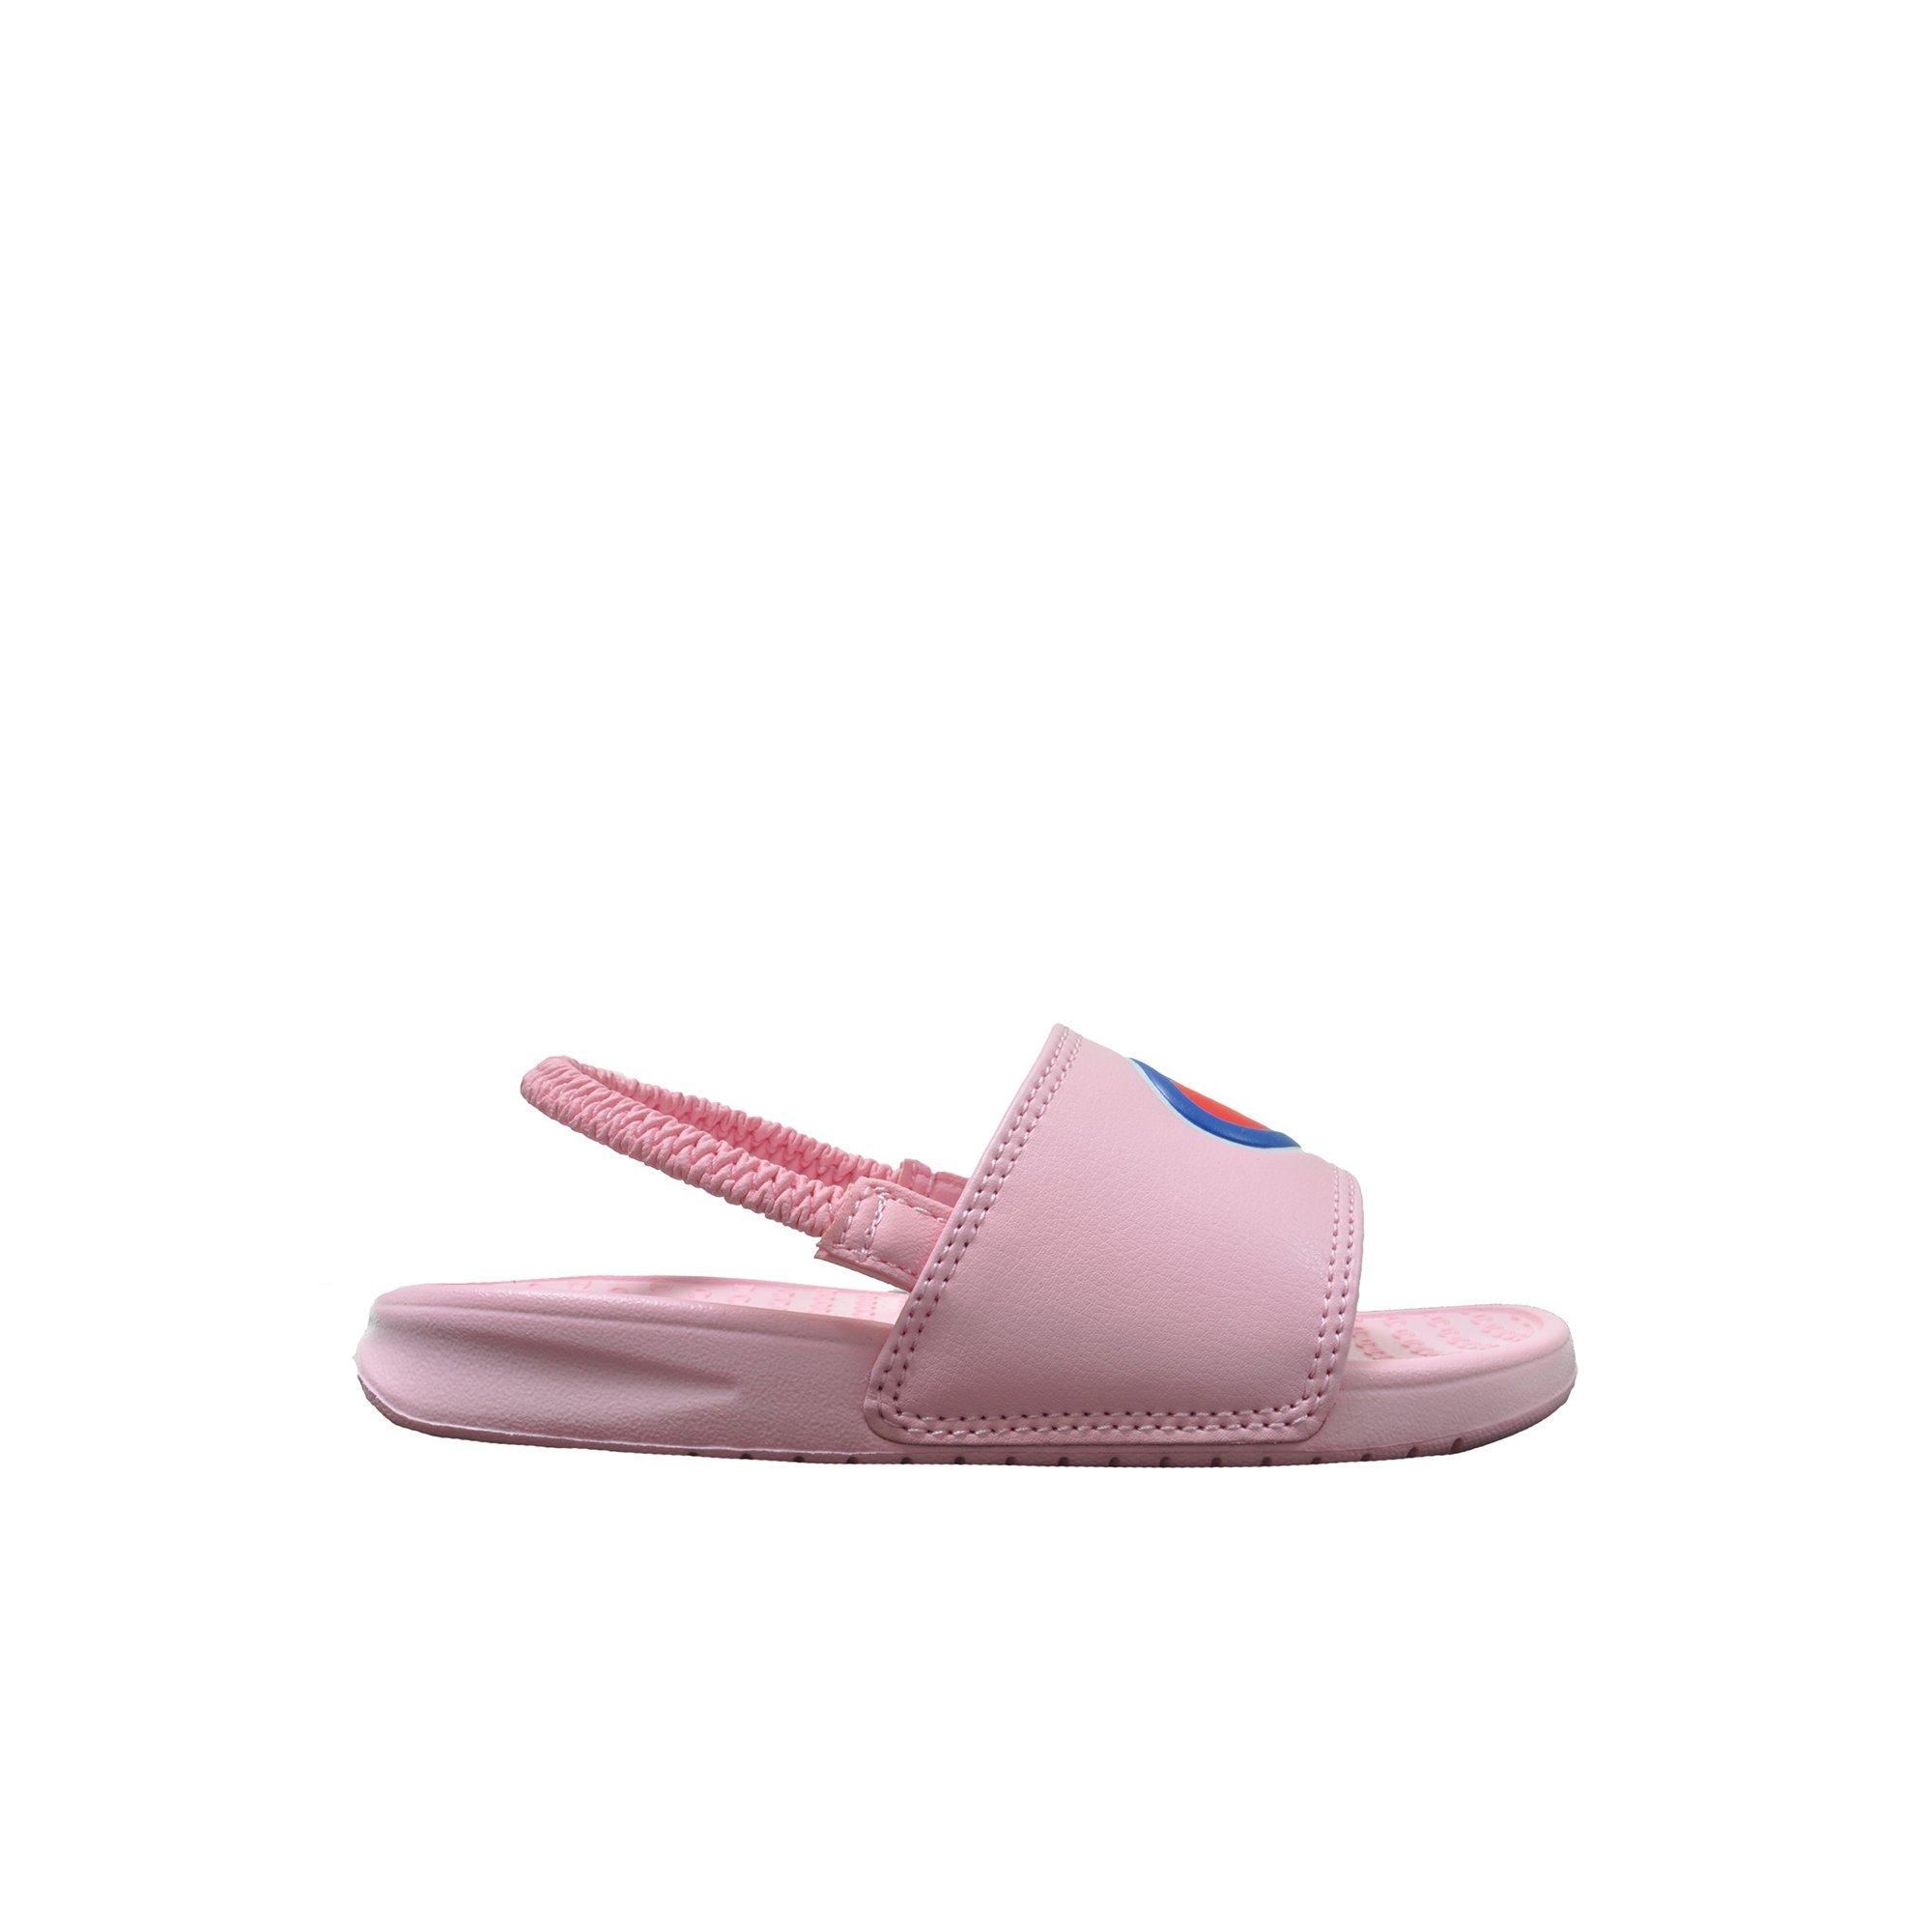 champion sandals for toddlers